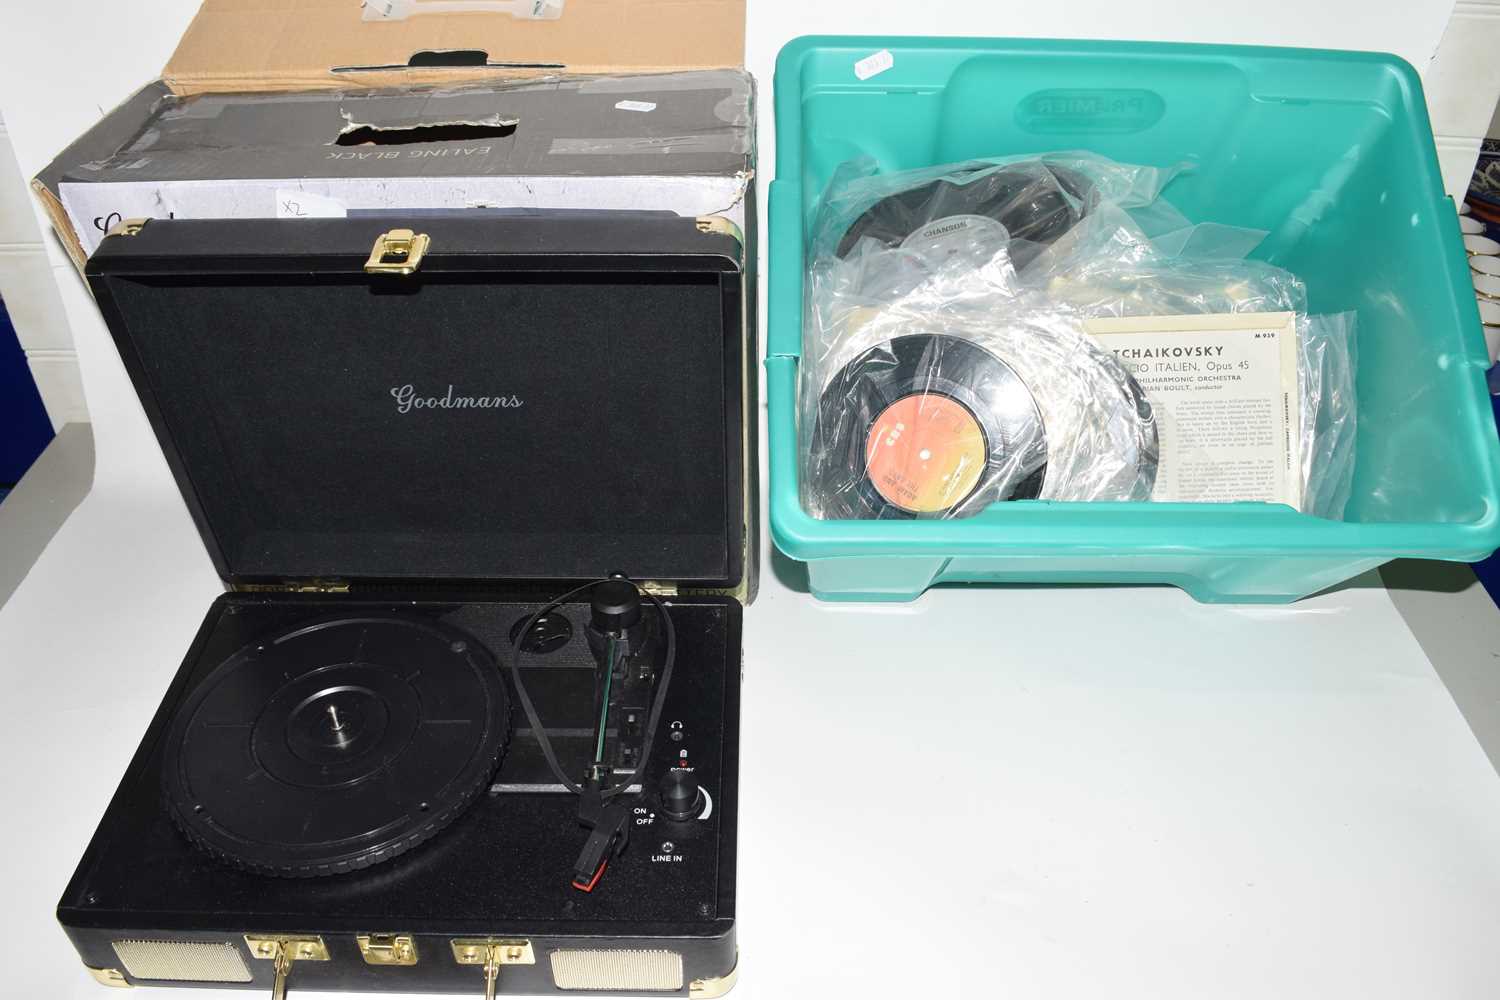 Modern portable Goodmans turntable and box of assorted singles - Image 2 of 2